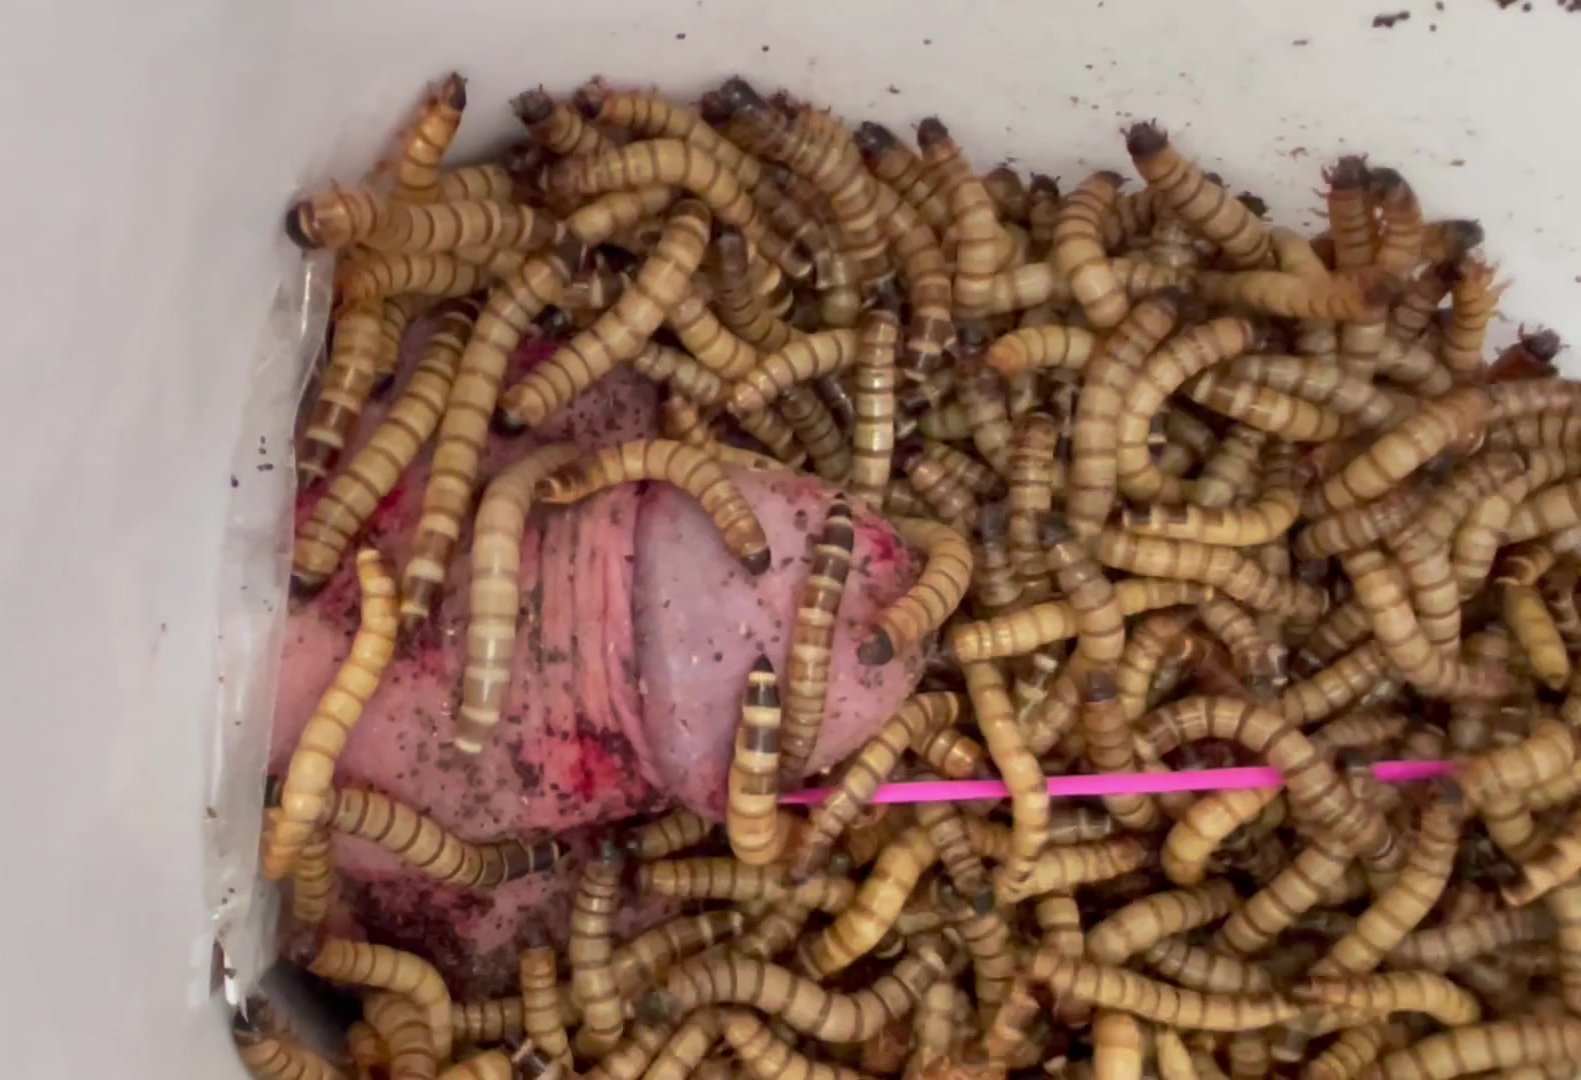 HUNGRY SUPERWORMS FEAST ON COCK & BALLS